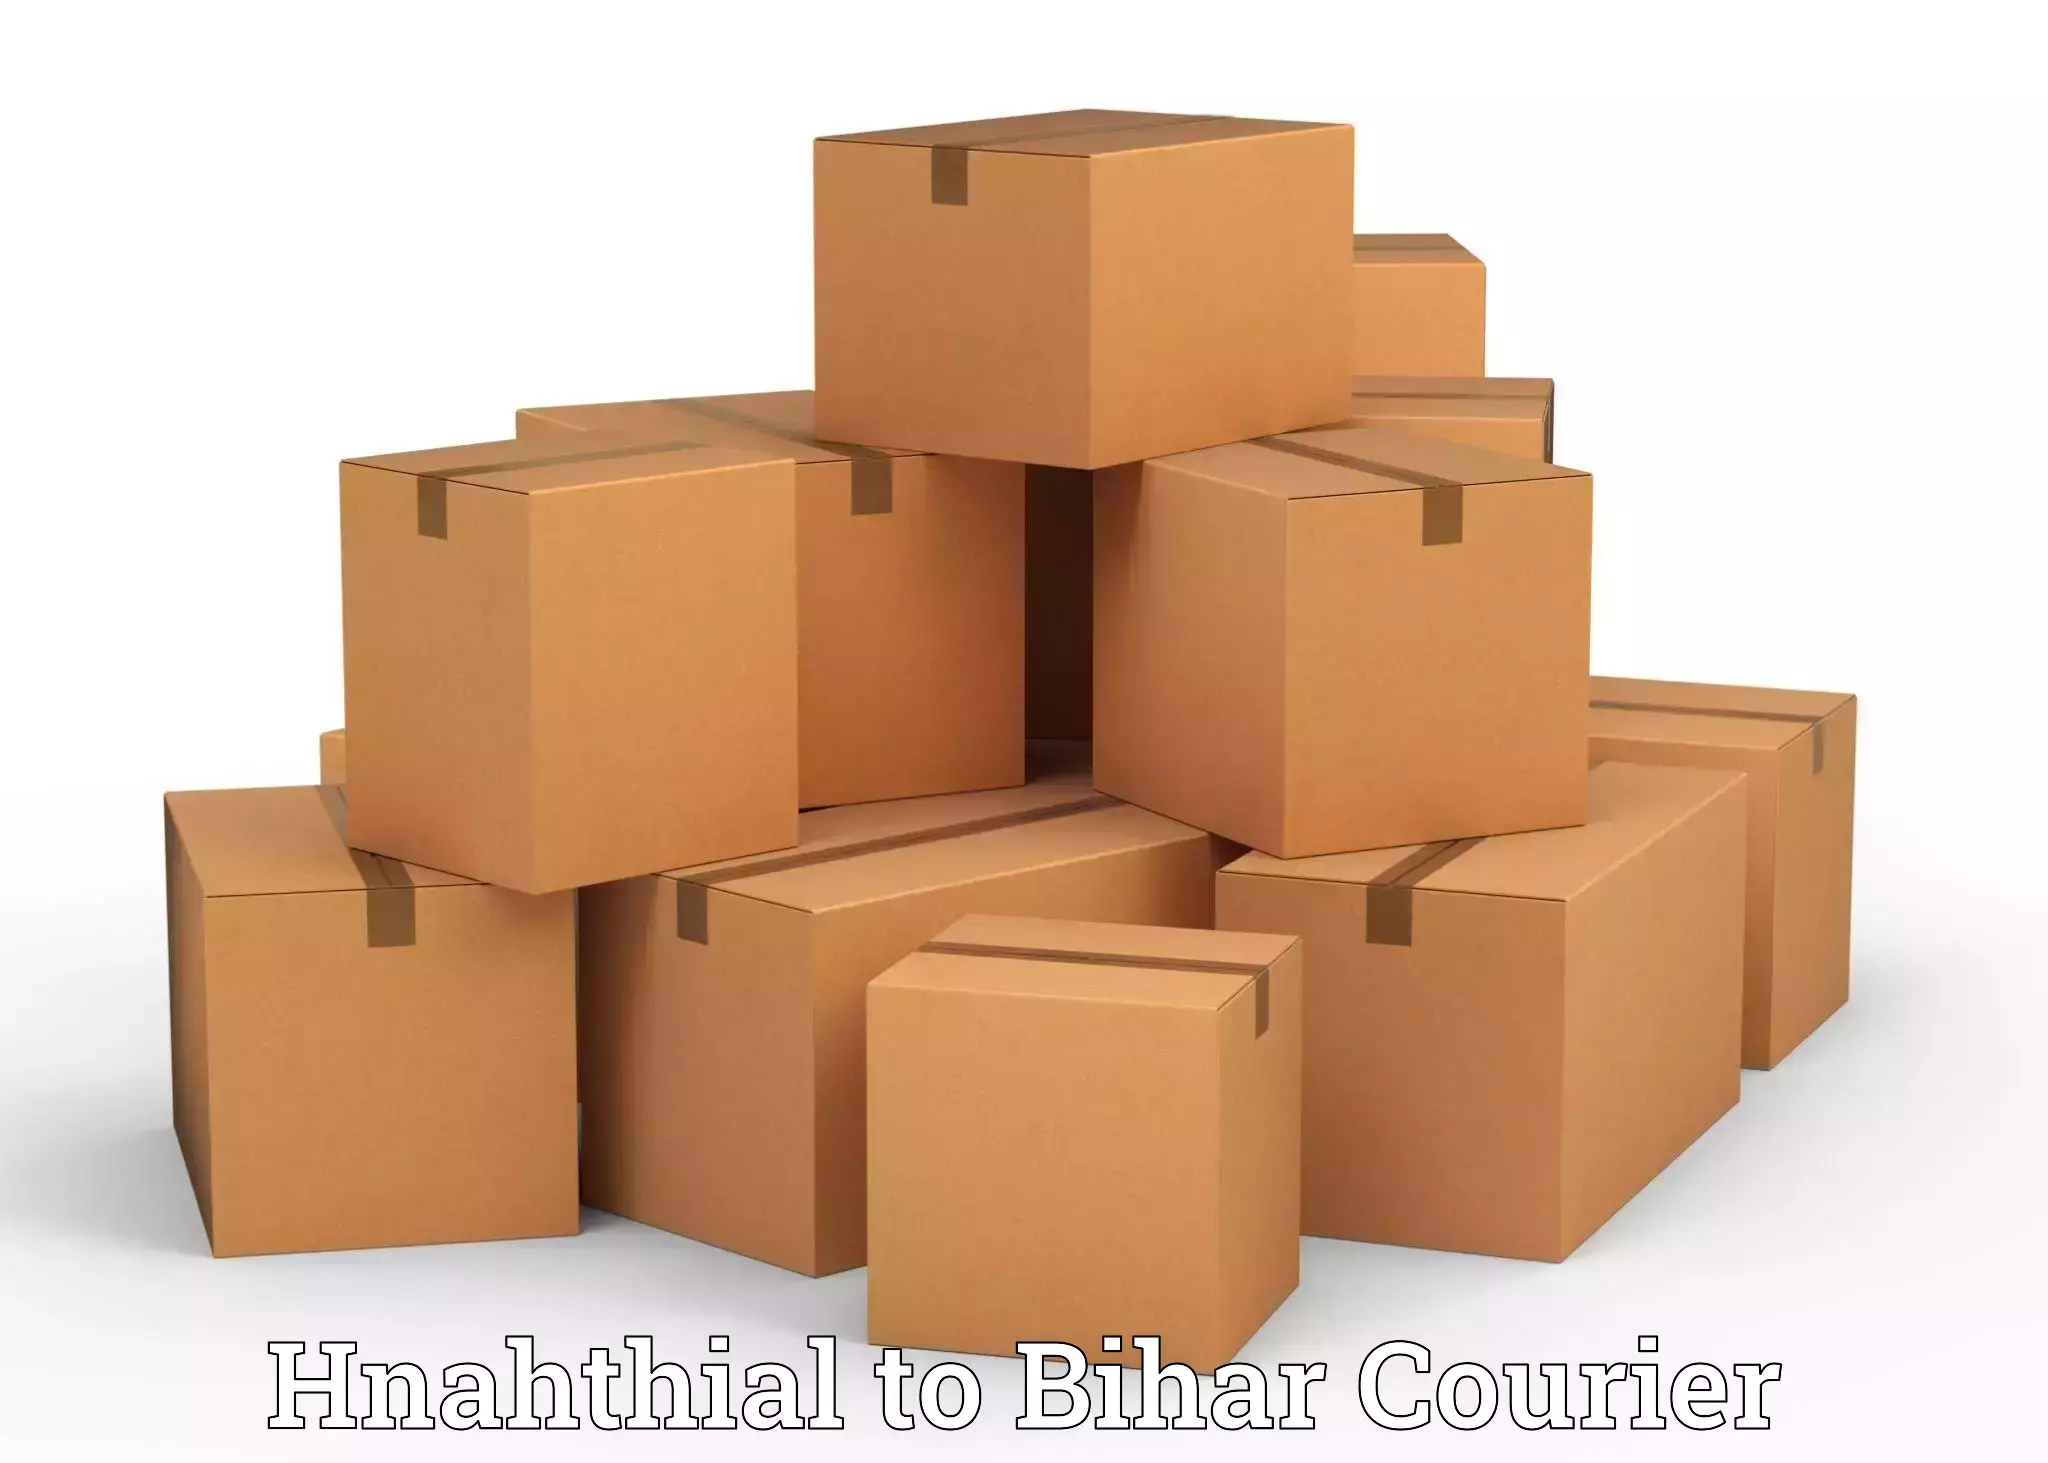 Professional relocation services Hnahthial to Bihar